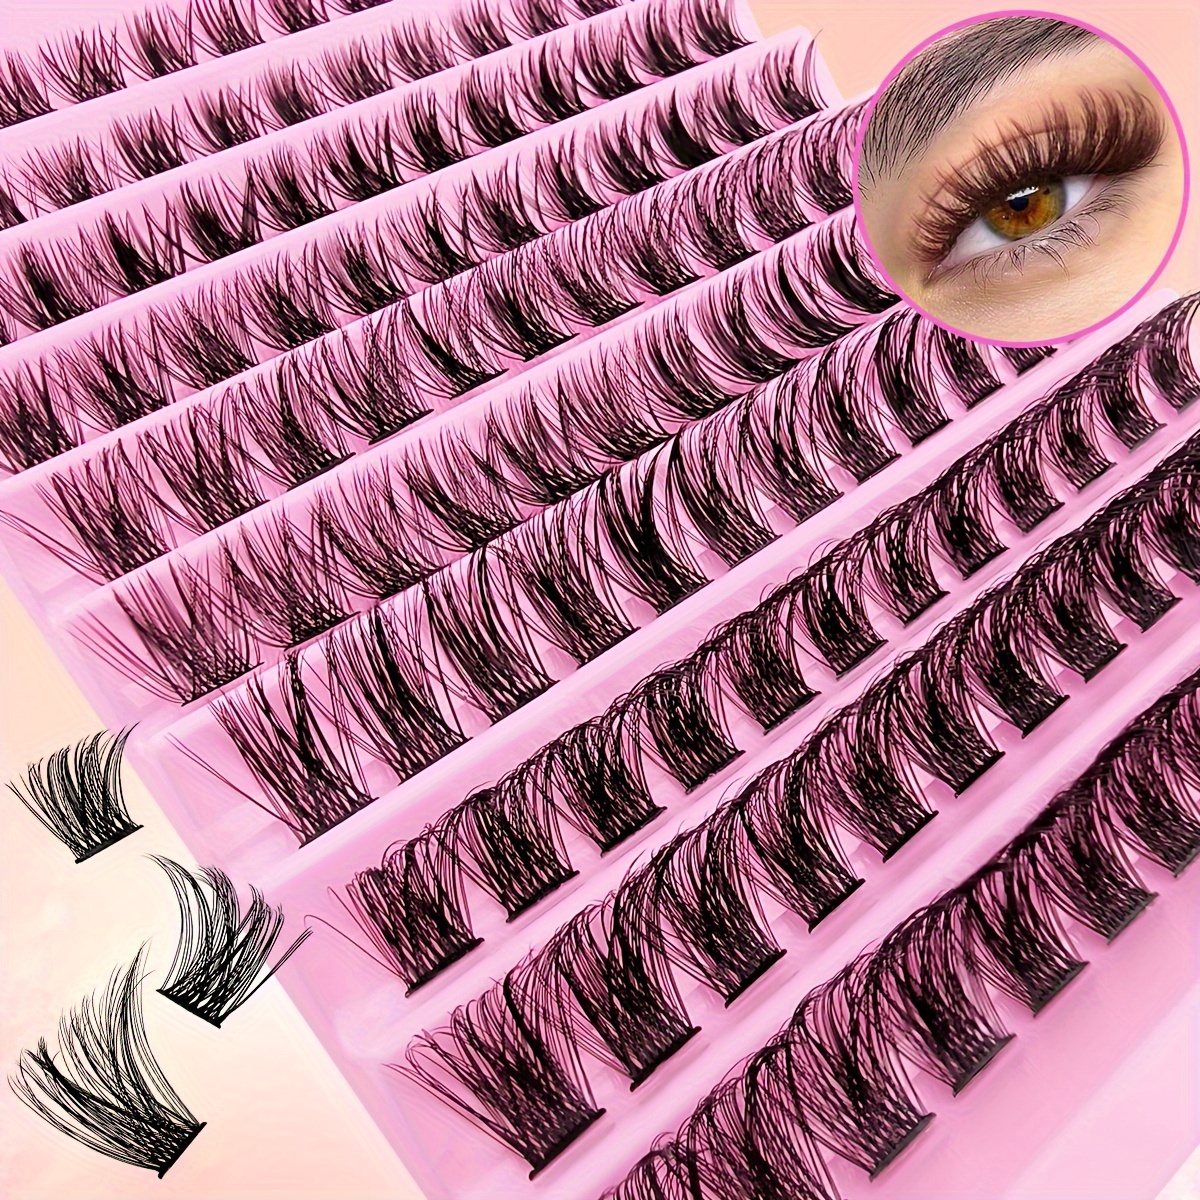 

120pcs Cluster Lashes 8-16mm Wispy Individual Lashes Natural Look Lashes D Fluffy Cluster Lashes Diy Eyelash Extension